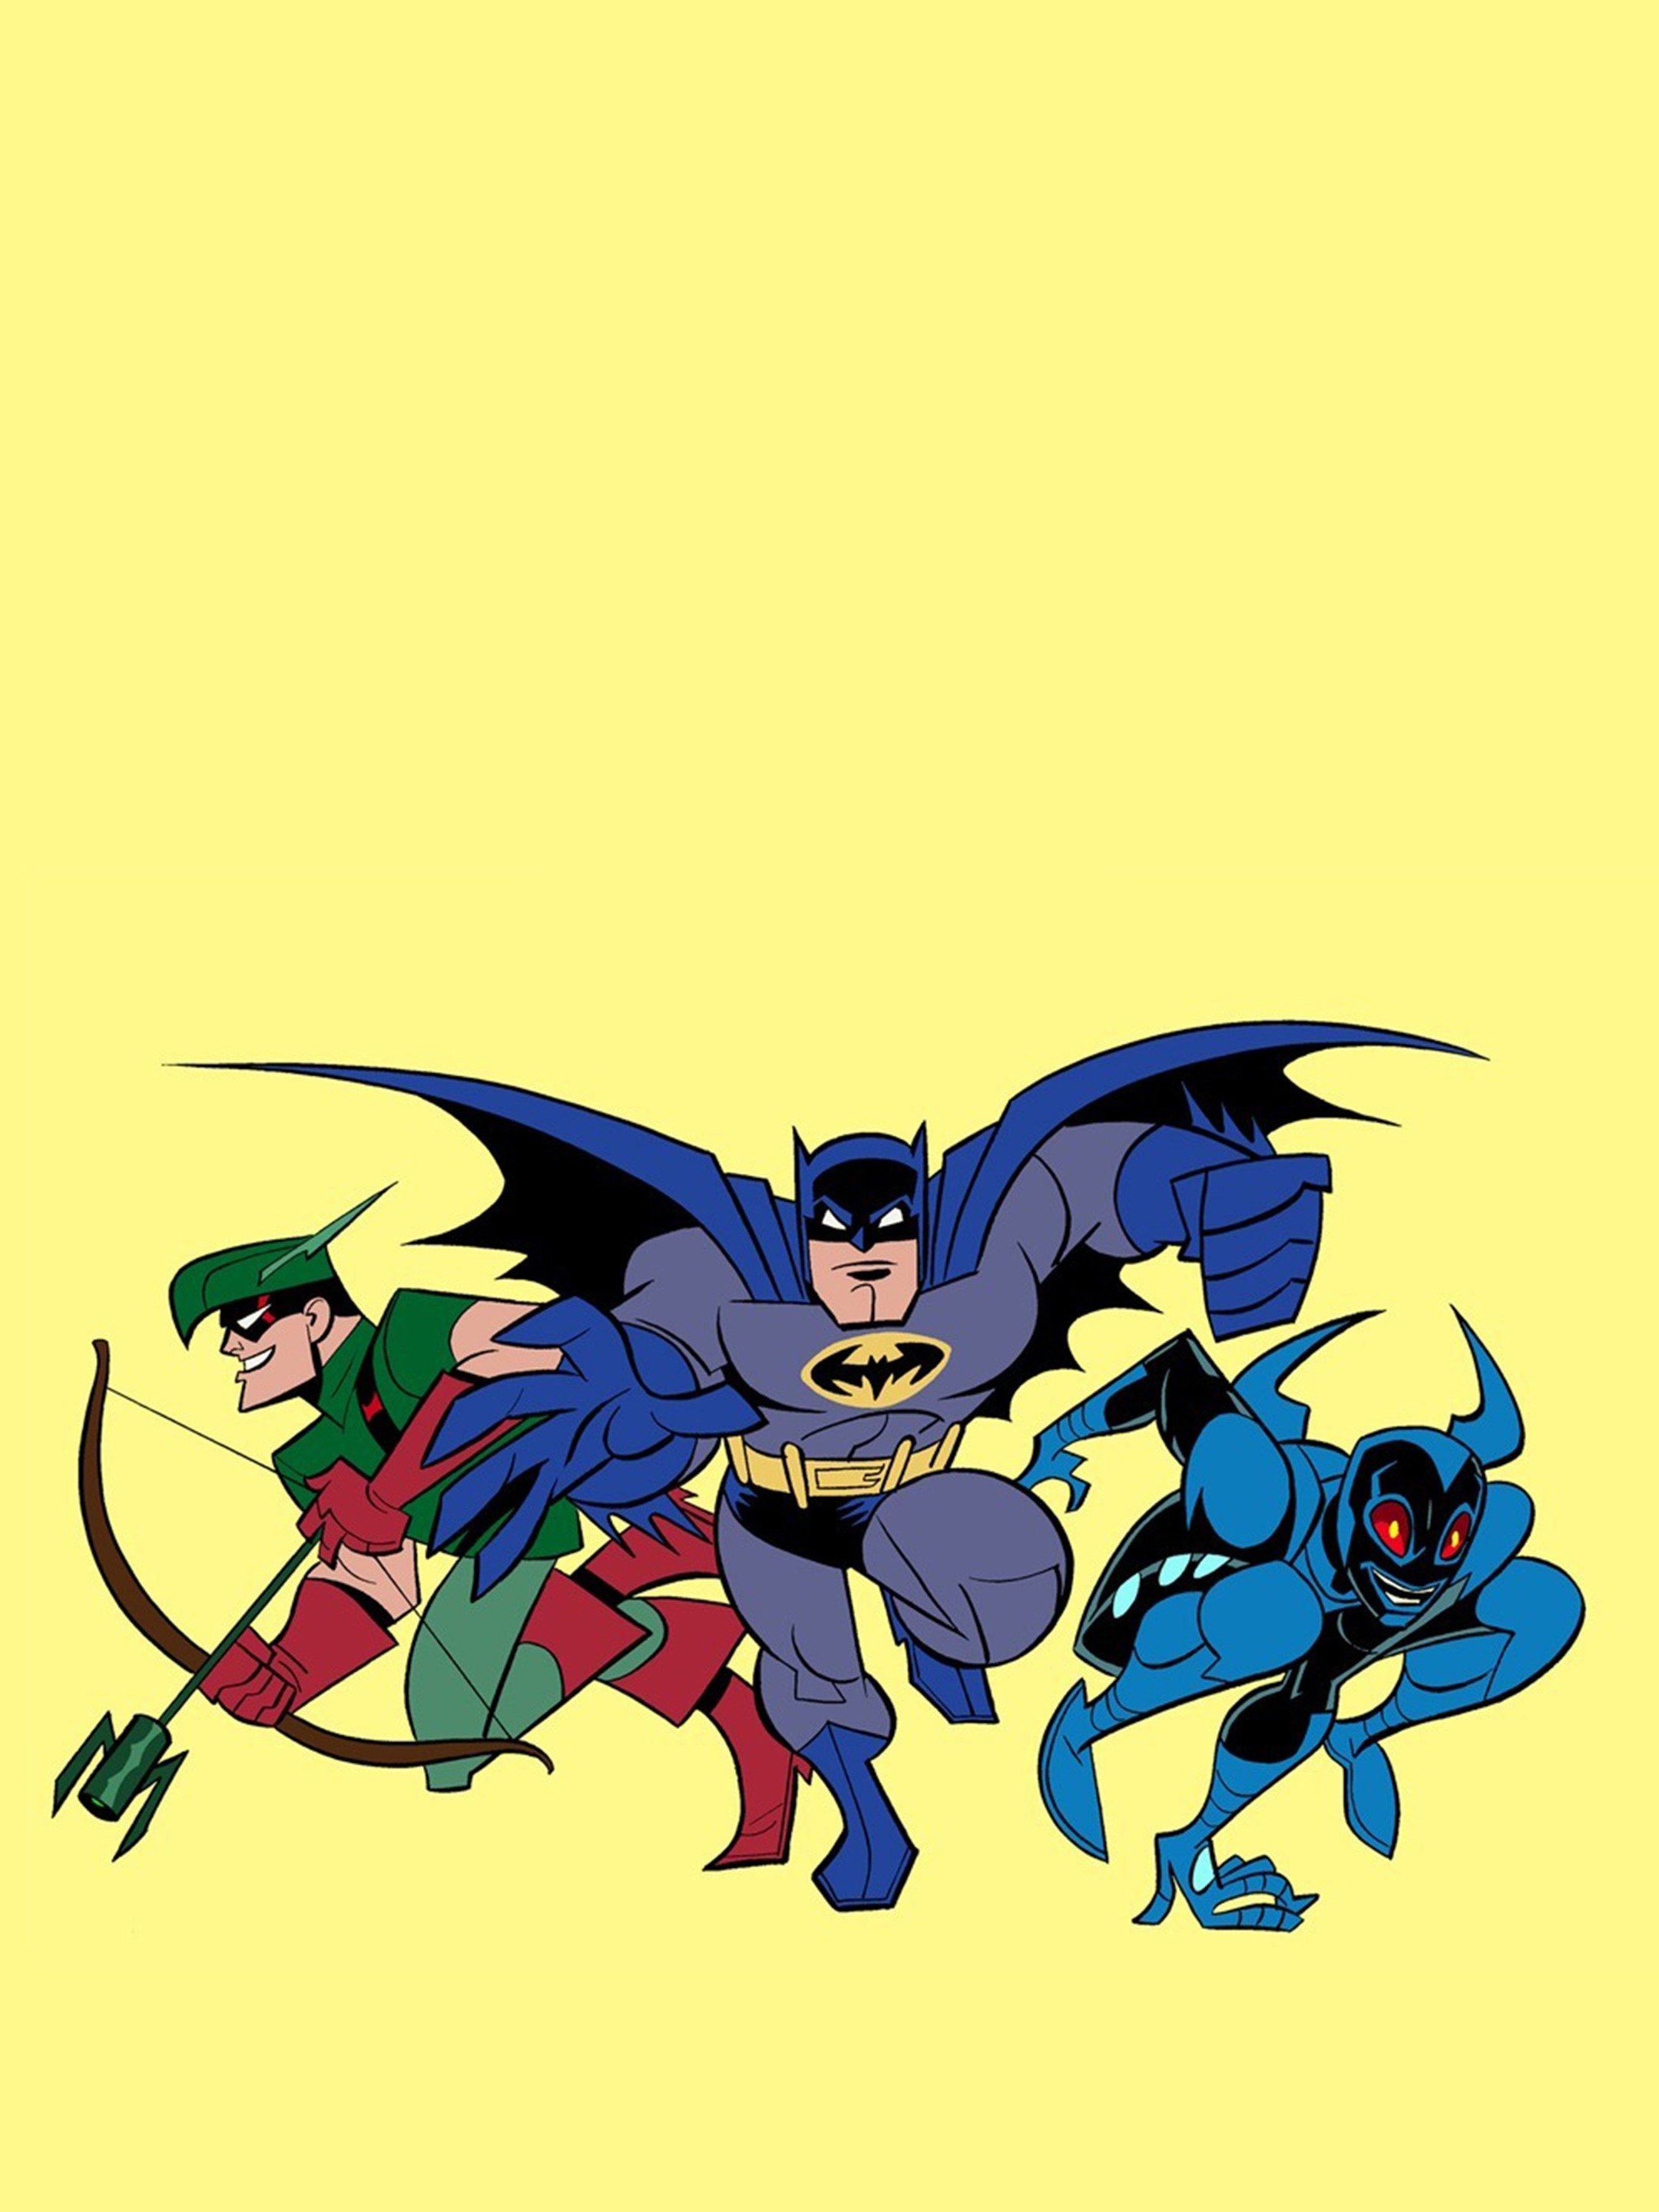 Batman: The Brave and the Bold - Rotten Tomatoes